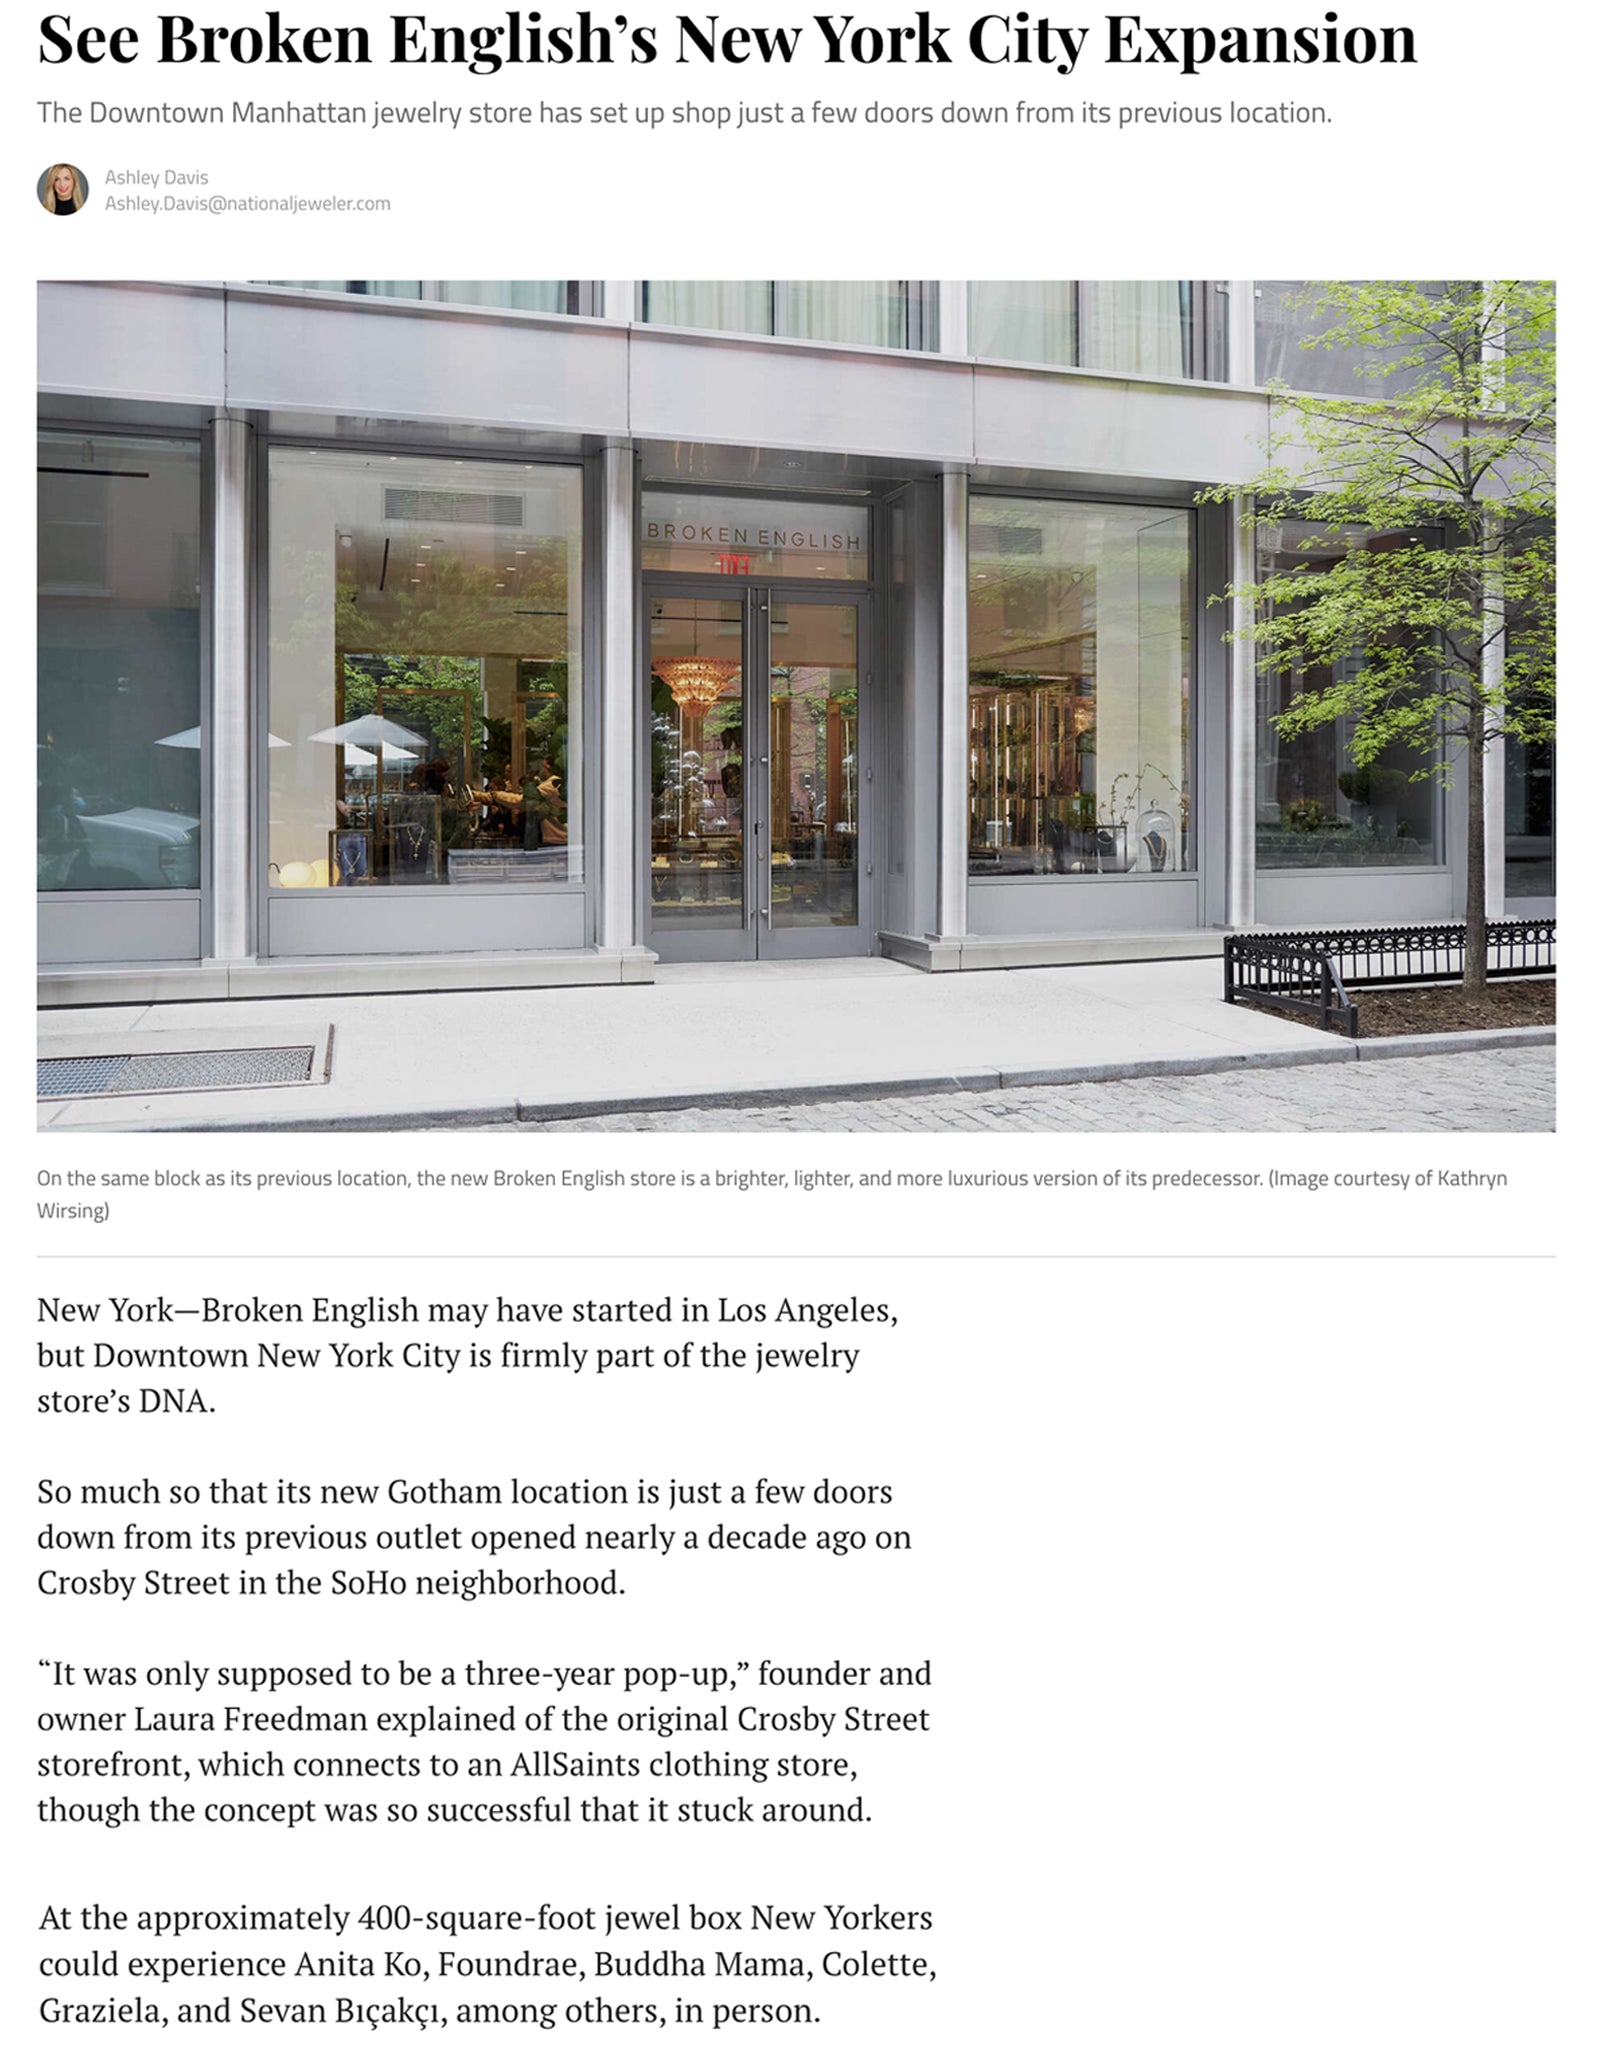 National Jeweler: See Broken English's New York City Expansion